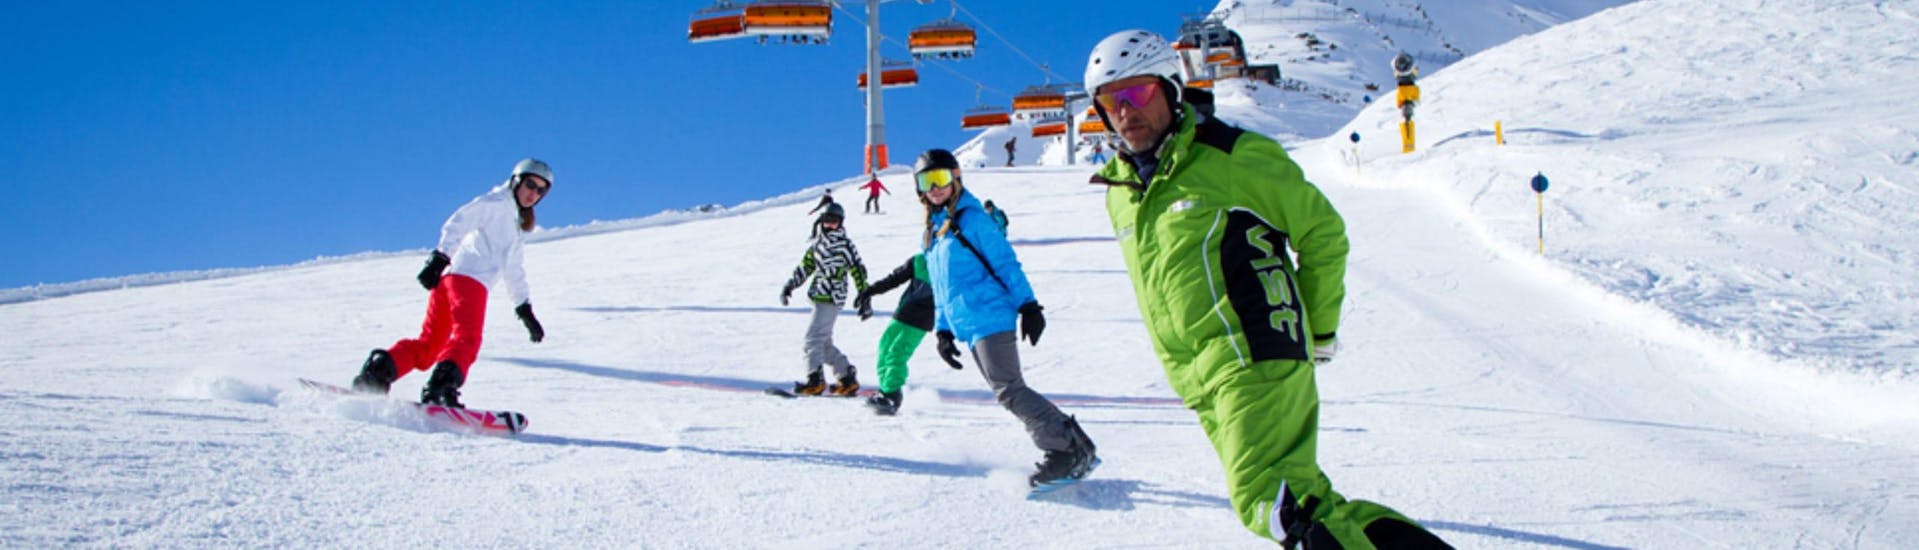 A group of people is learning to snowboard during their Snowboarding Lessons for Kids & Adults - All Levels with the ski school Ski- und Bikeschule Ötztal Sölden.